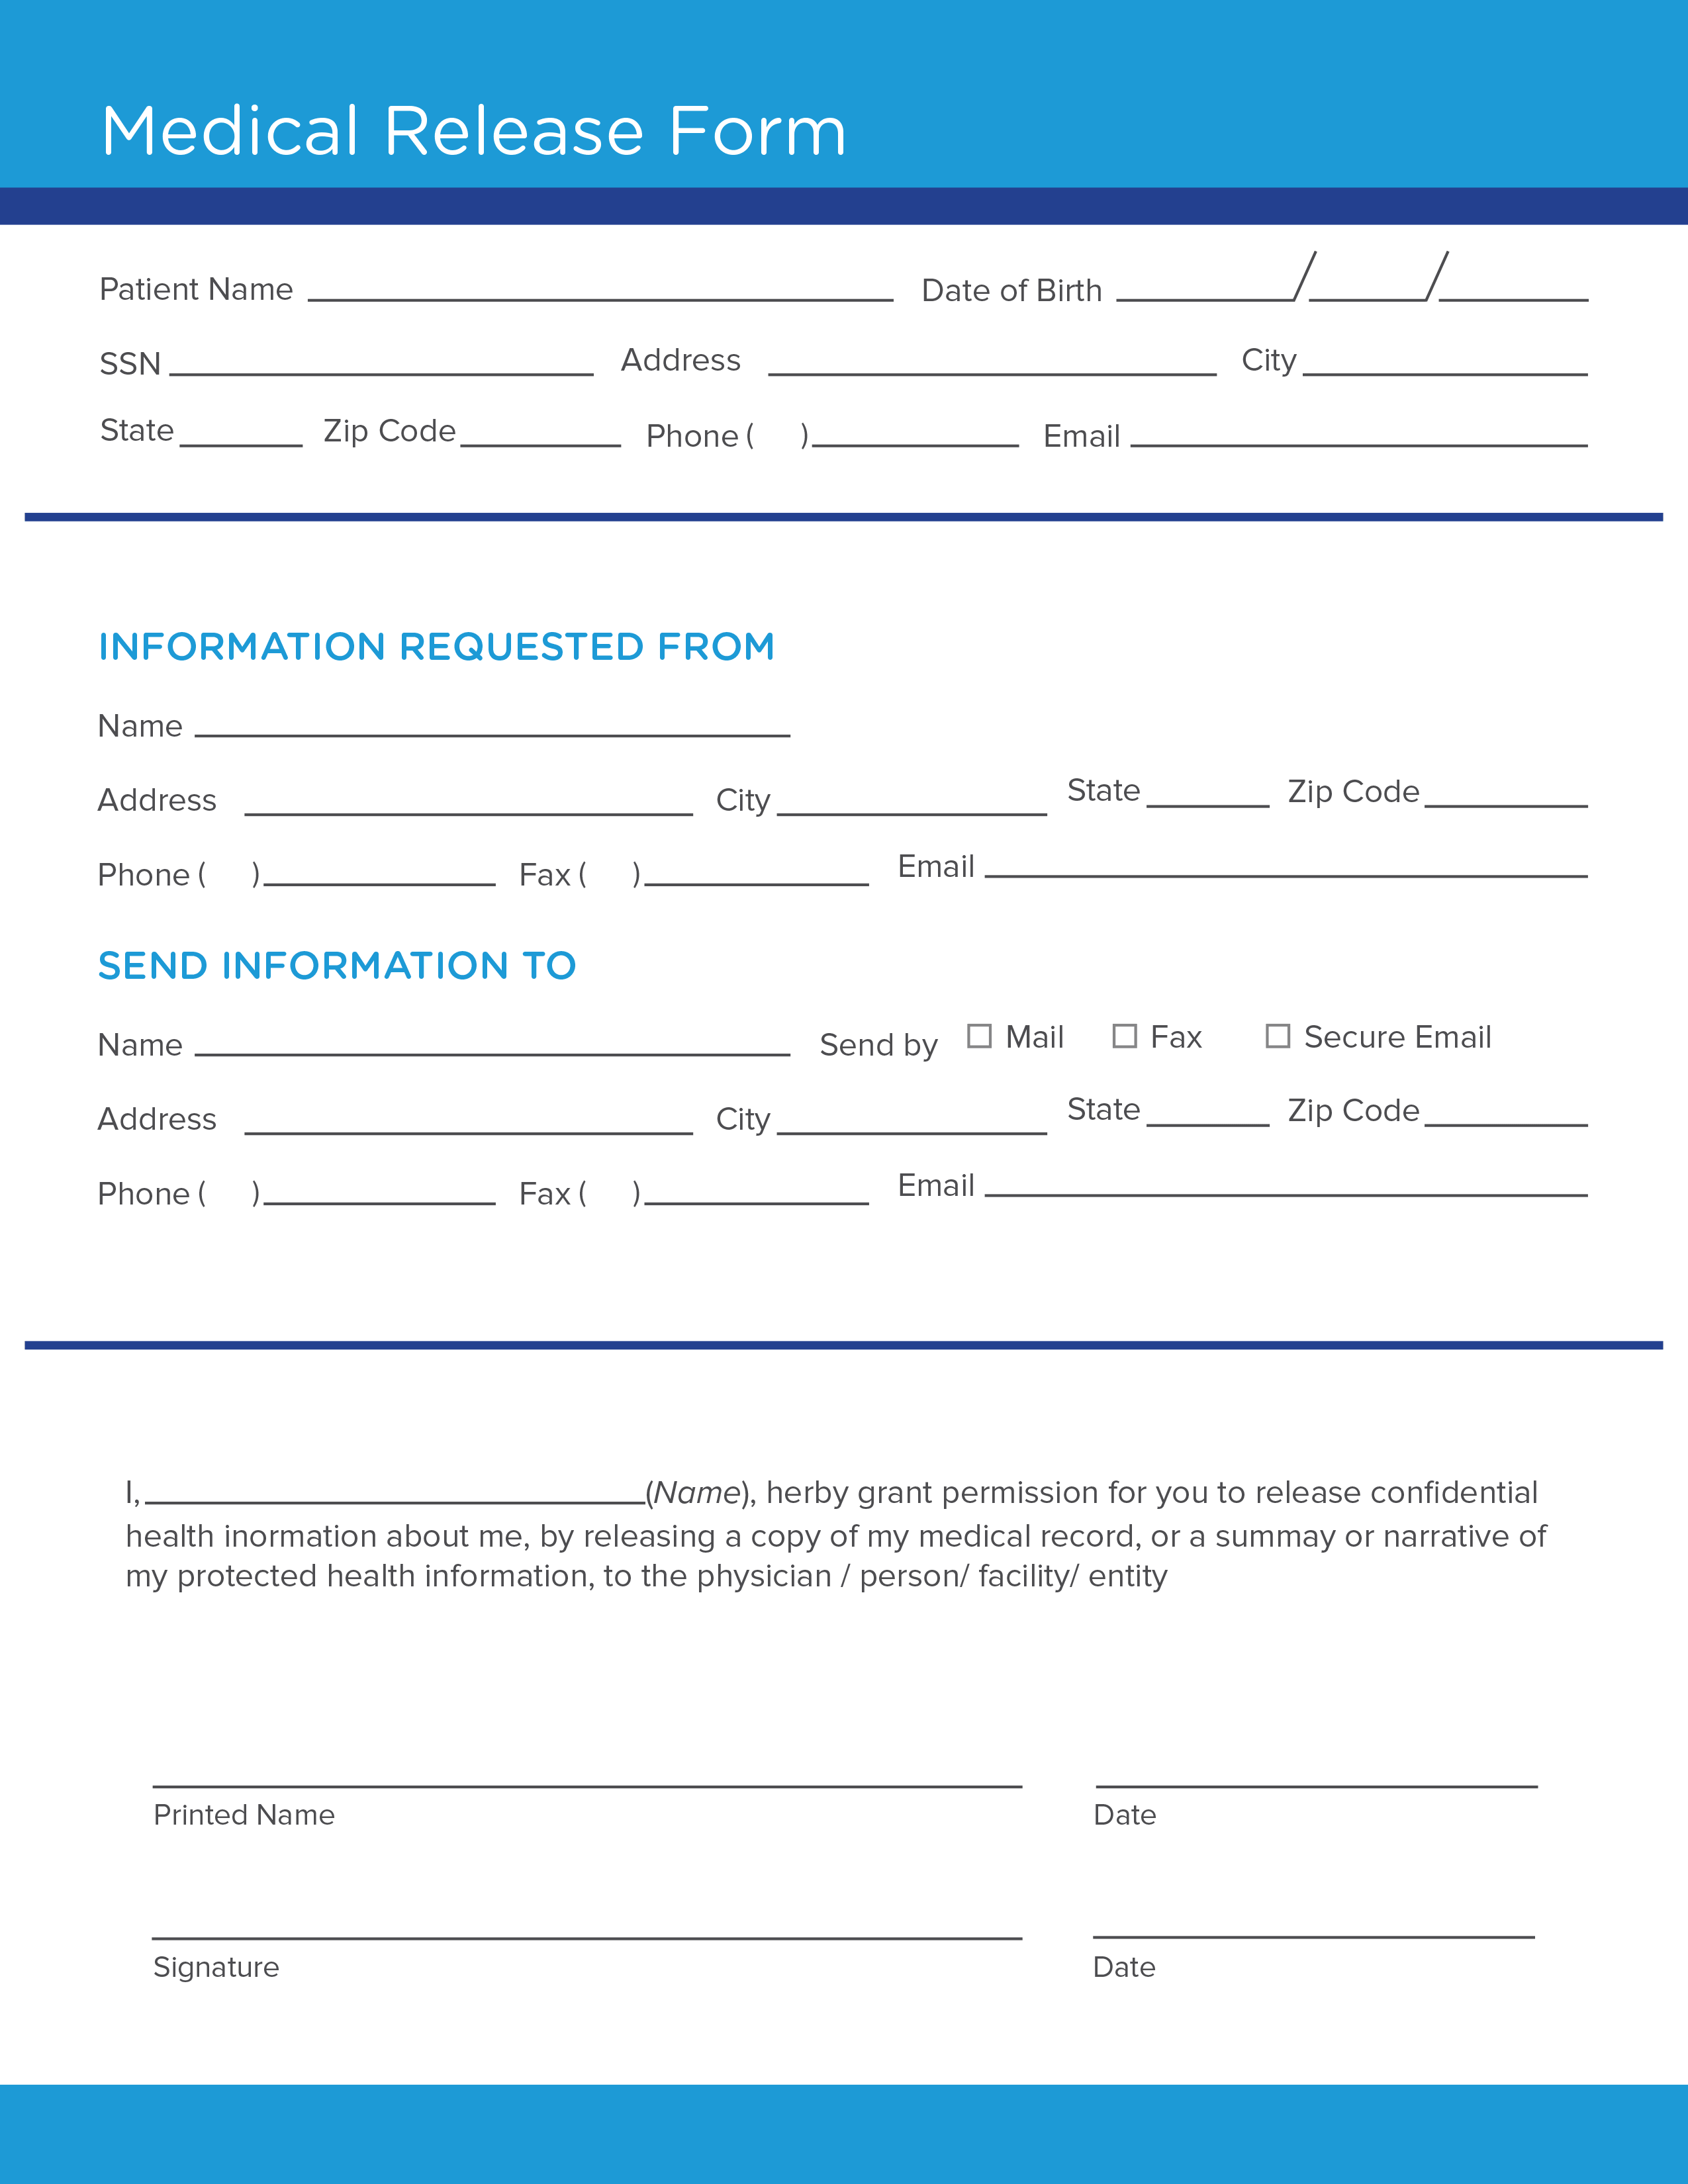 free-medical-release-form-printable